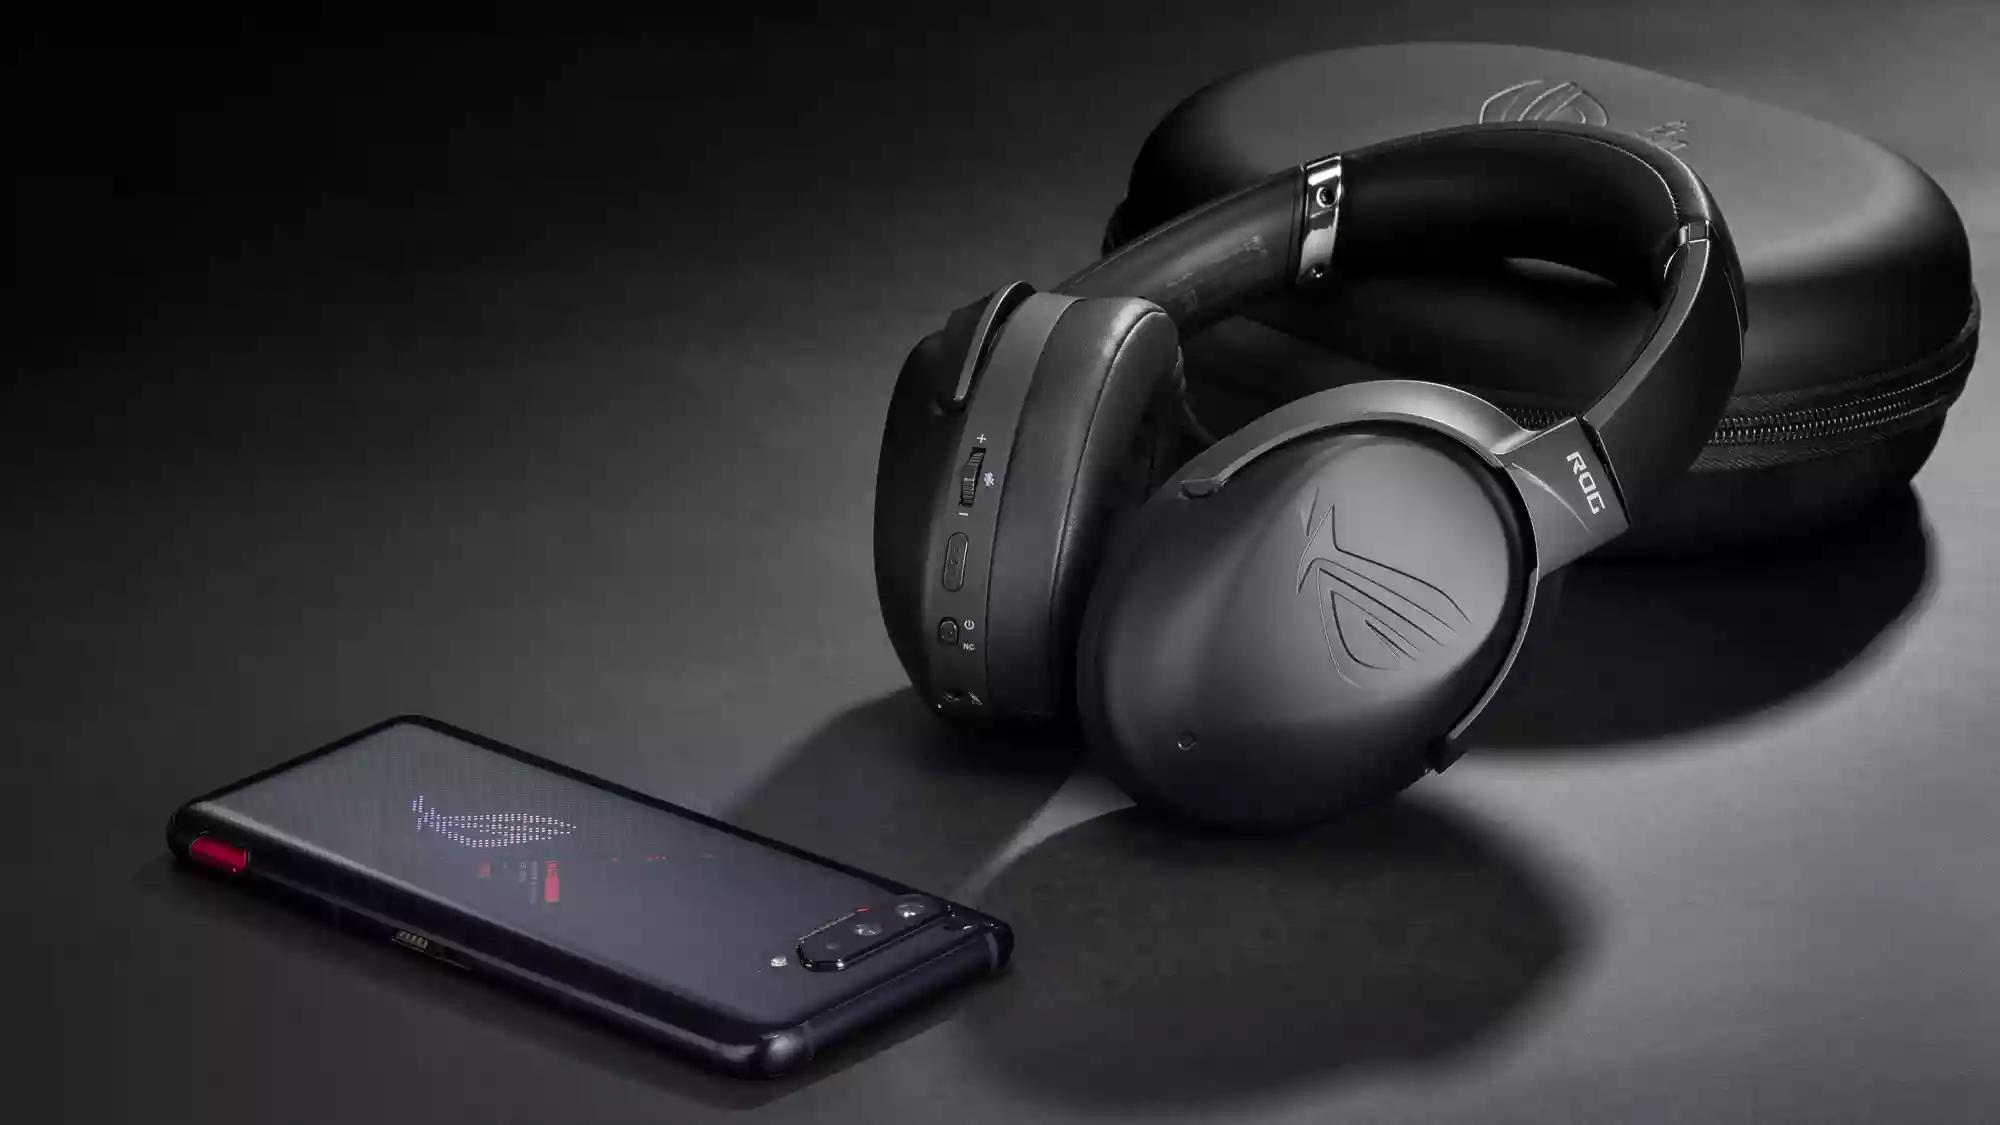 An ROG Strix Go BT headset resting on its carrying case, next to an ROG Phone on a desk.